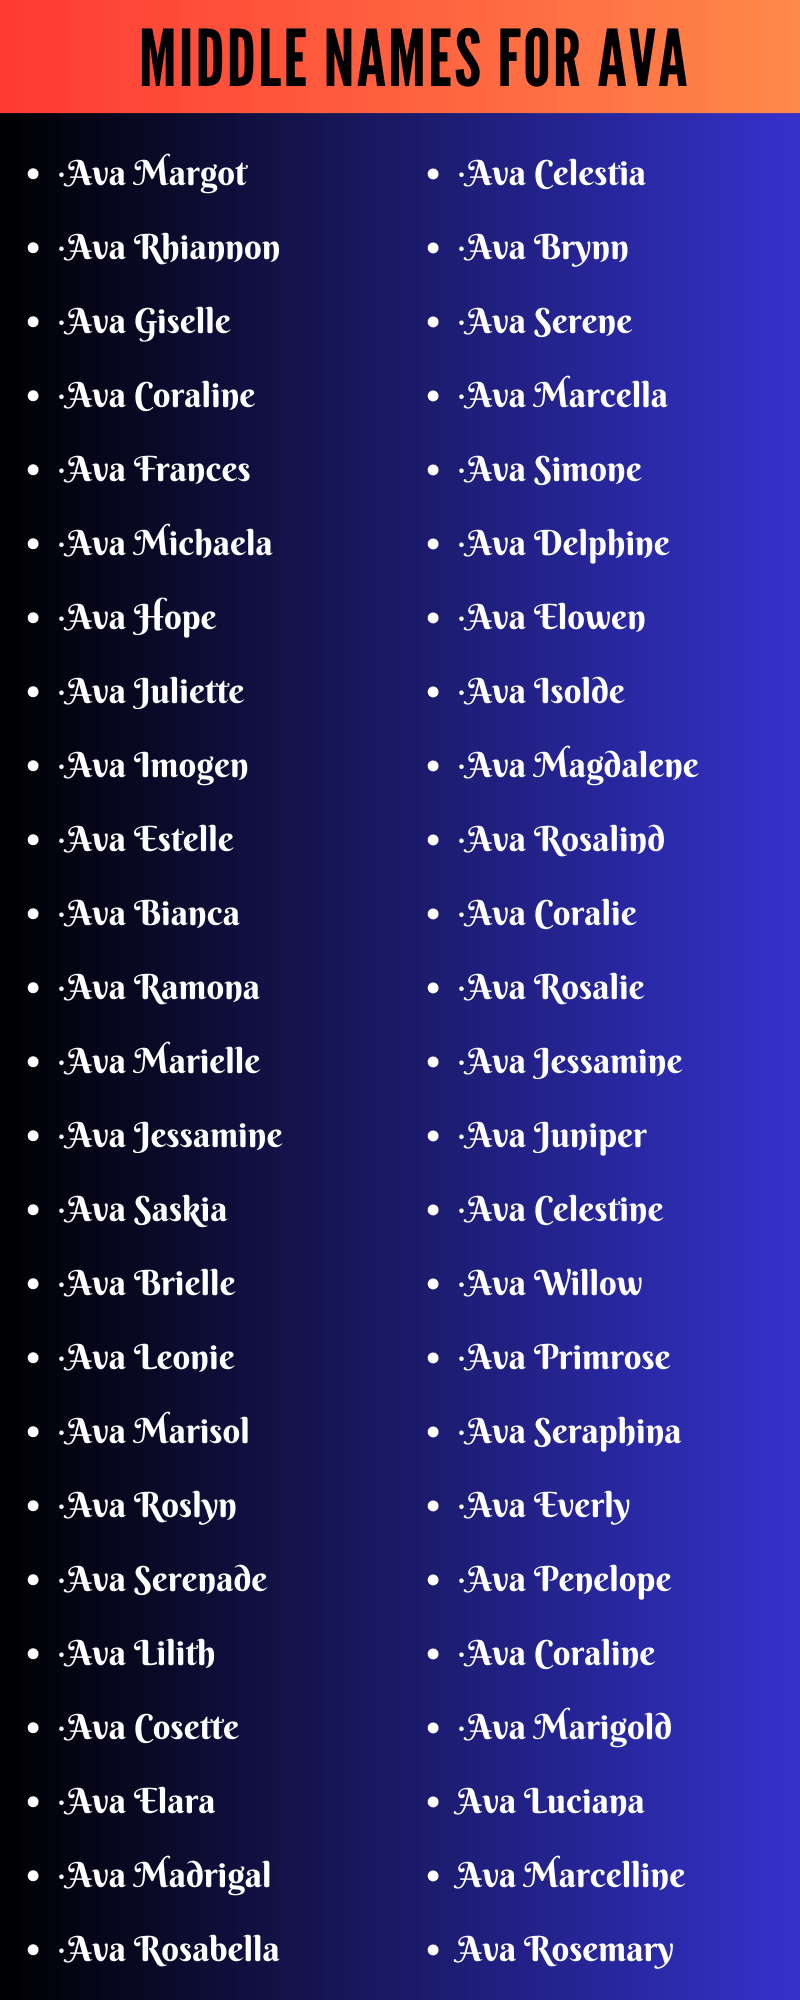 Middle Names For Ava